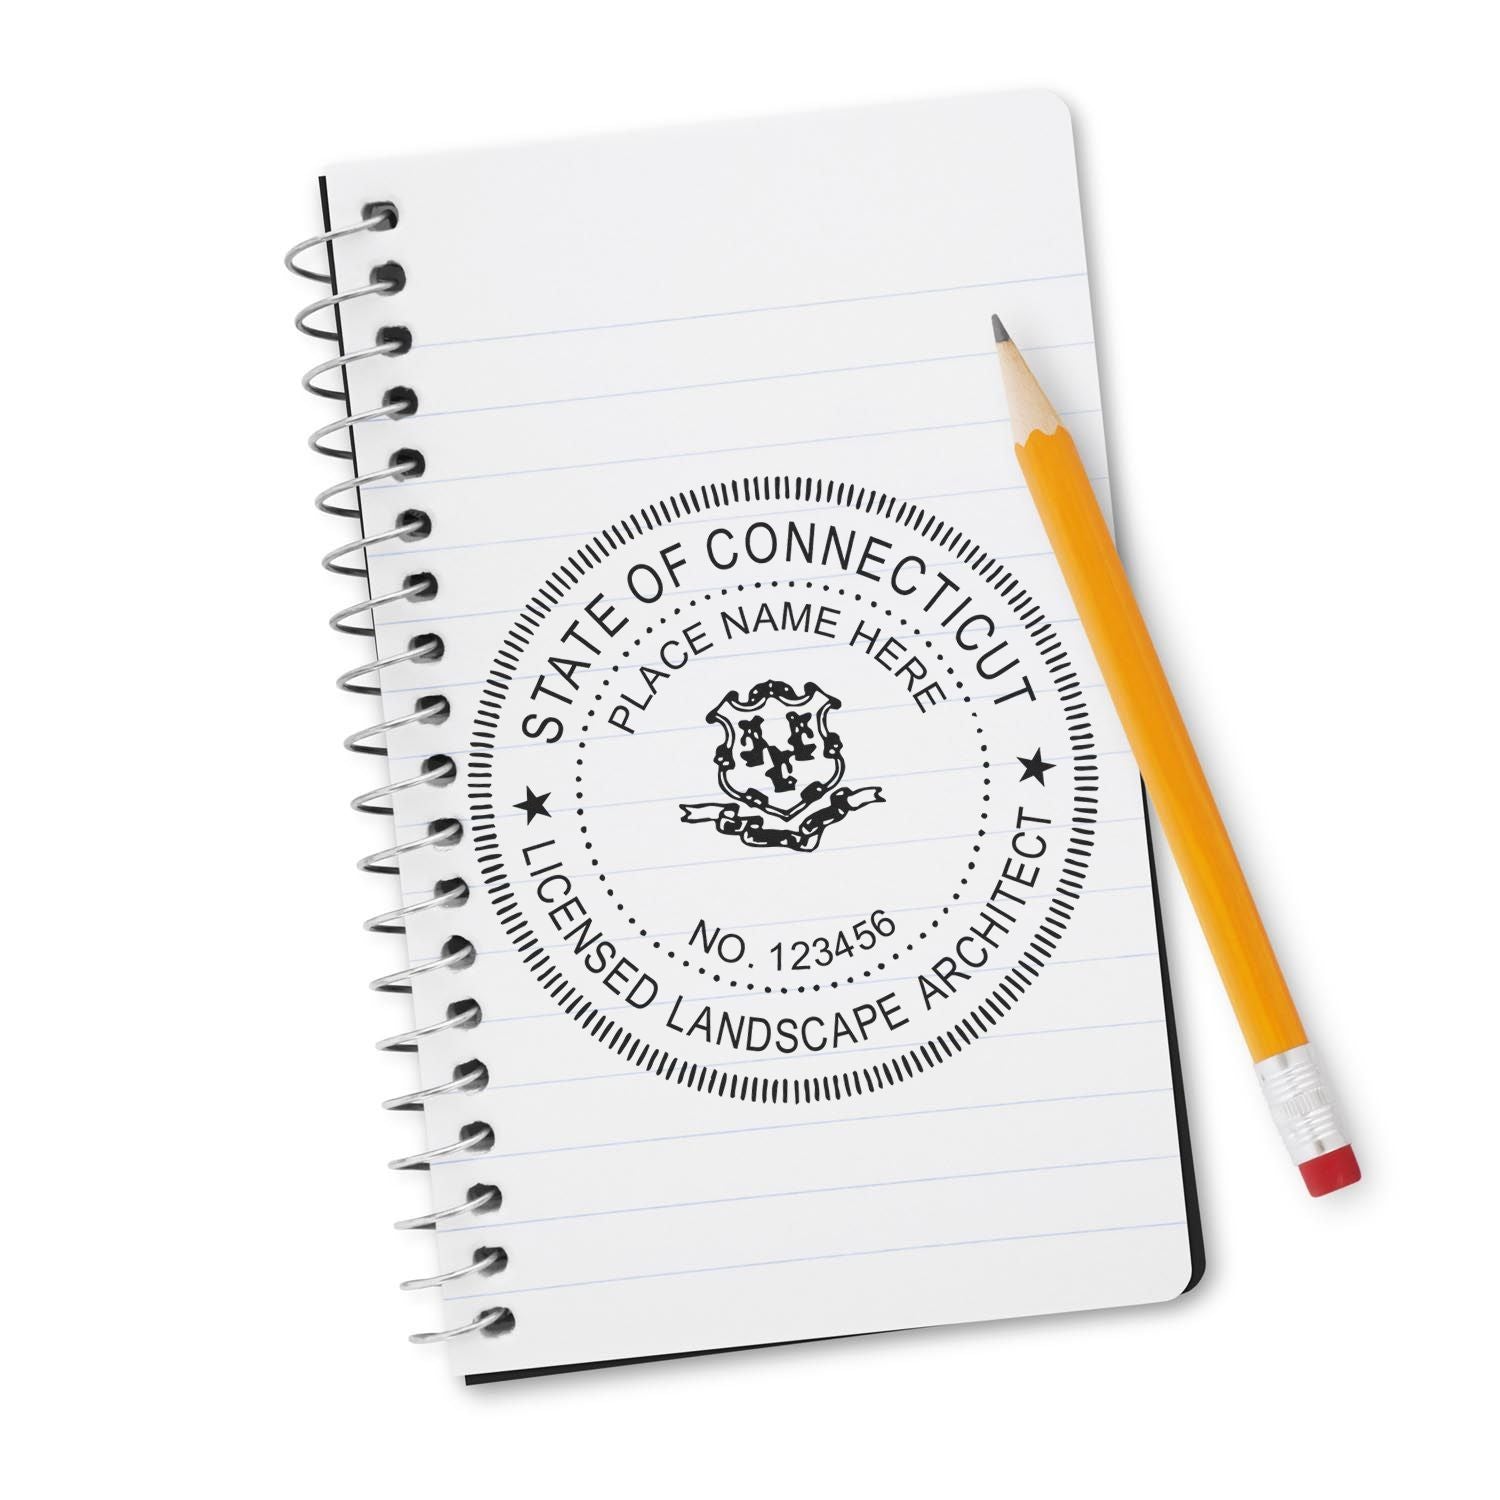 Connecticut Landscape Architect Stamp: Your Key to Professional Recognition Feature Image